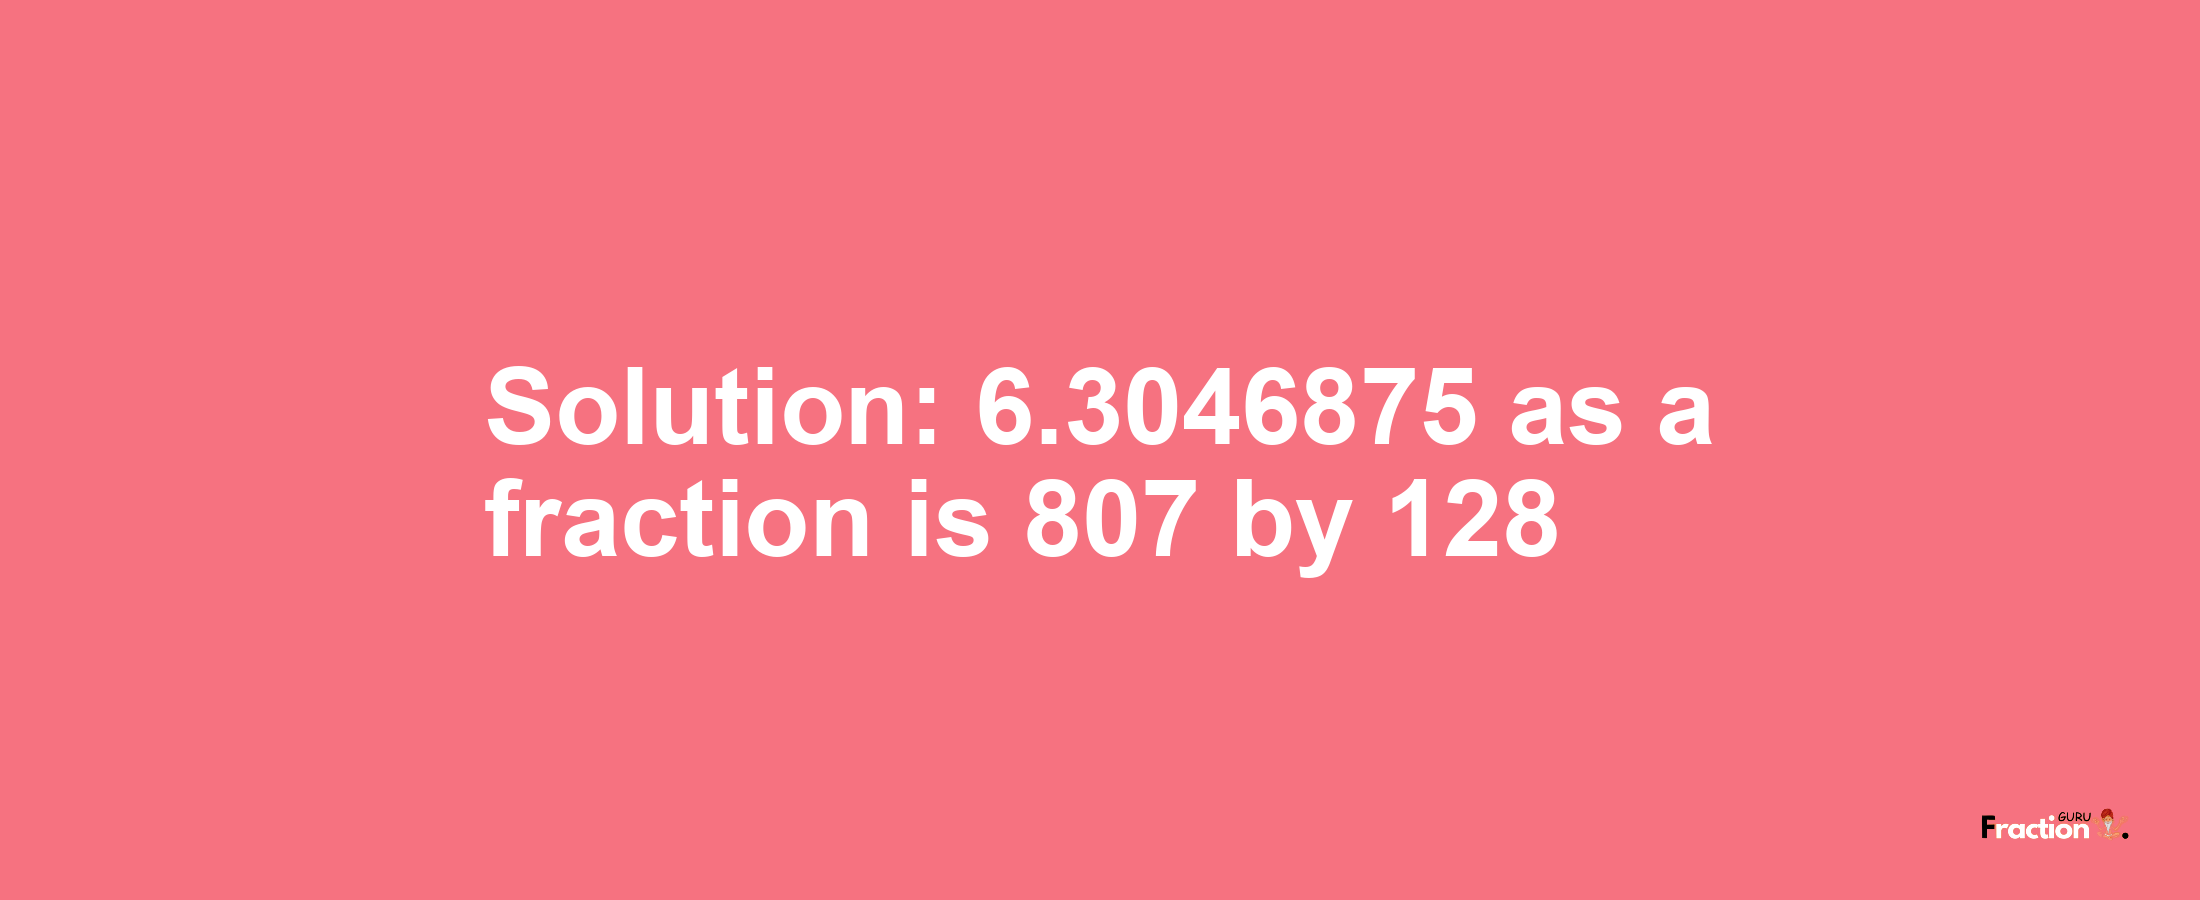 Solution:6.3046875 as a fraction is 807/128